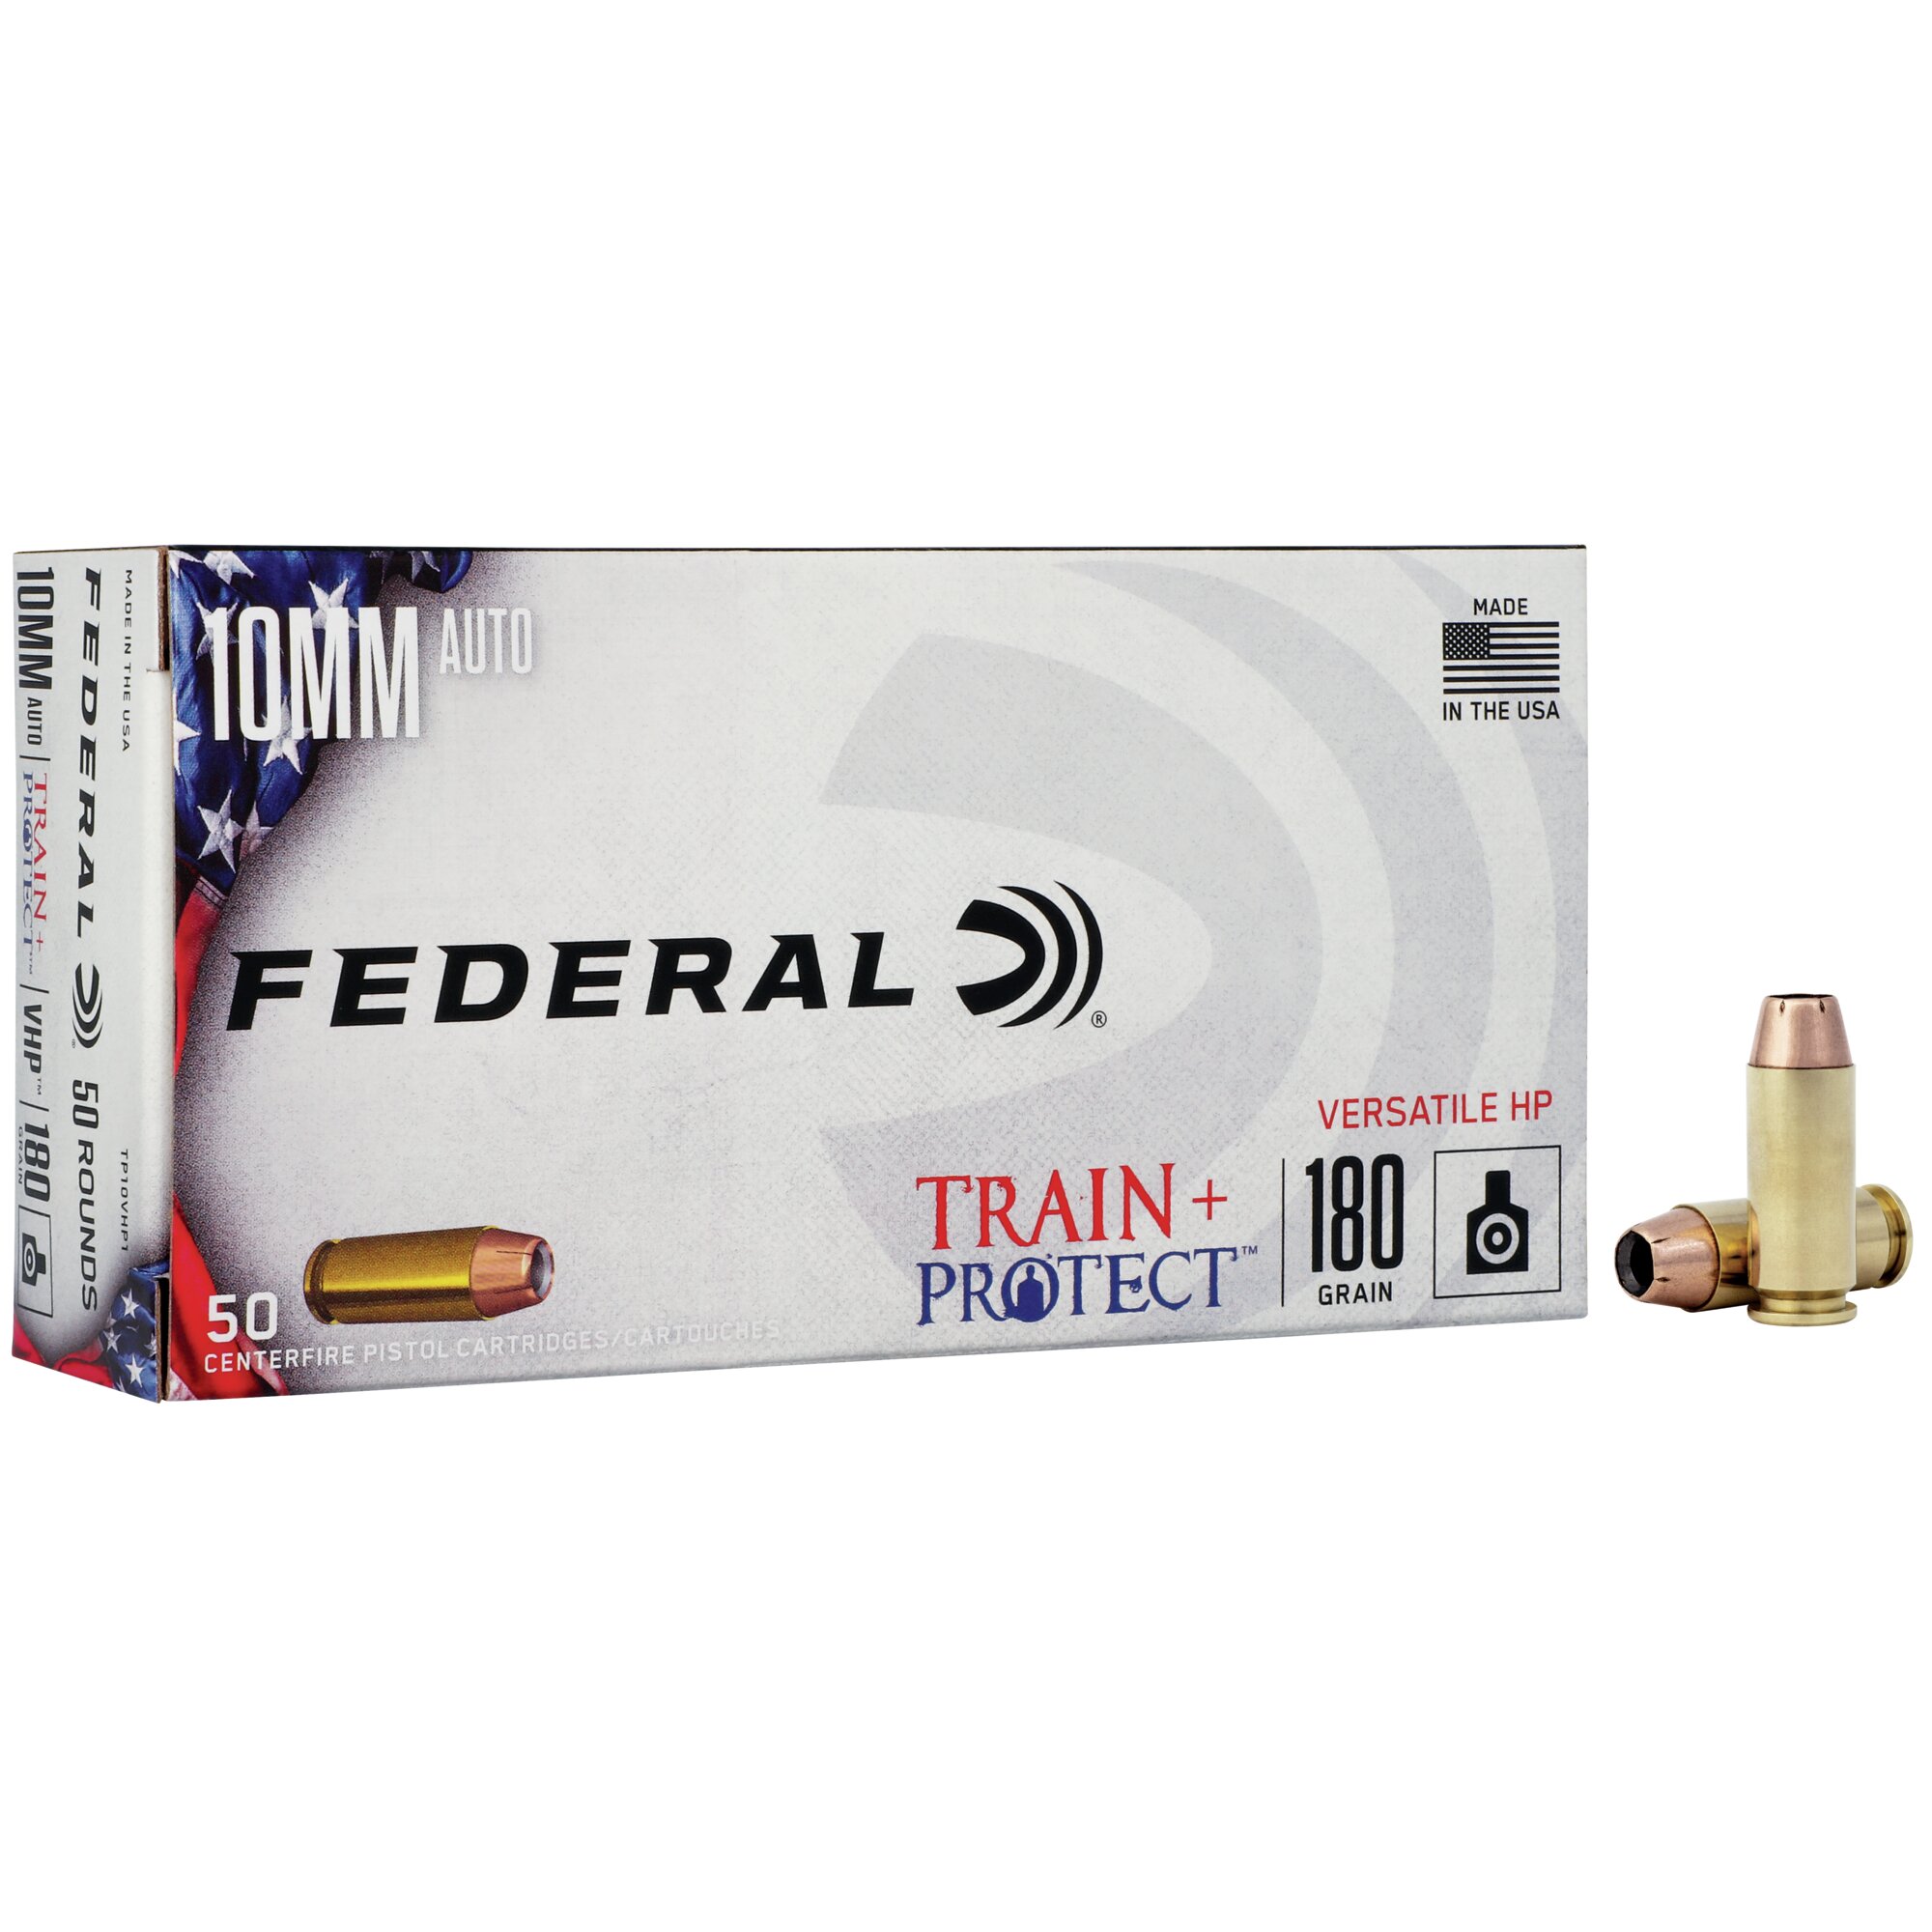 Buy Train + Protect for USD 58.99 | Federal Ammunition